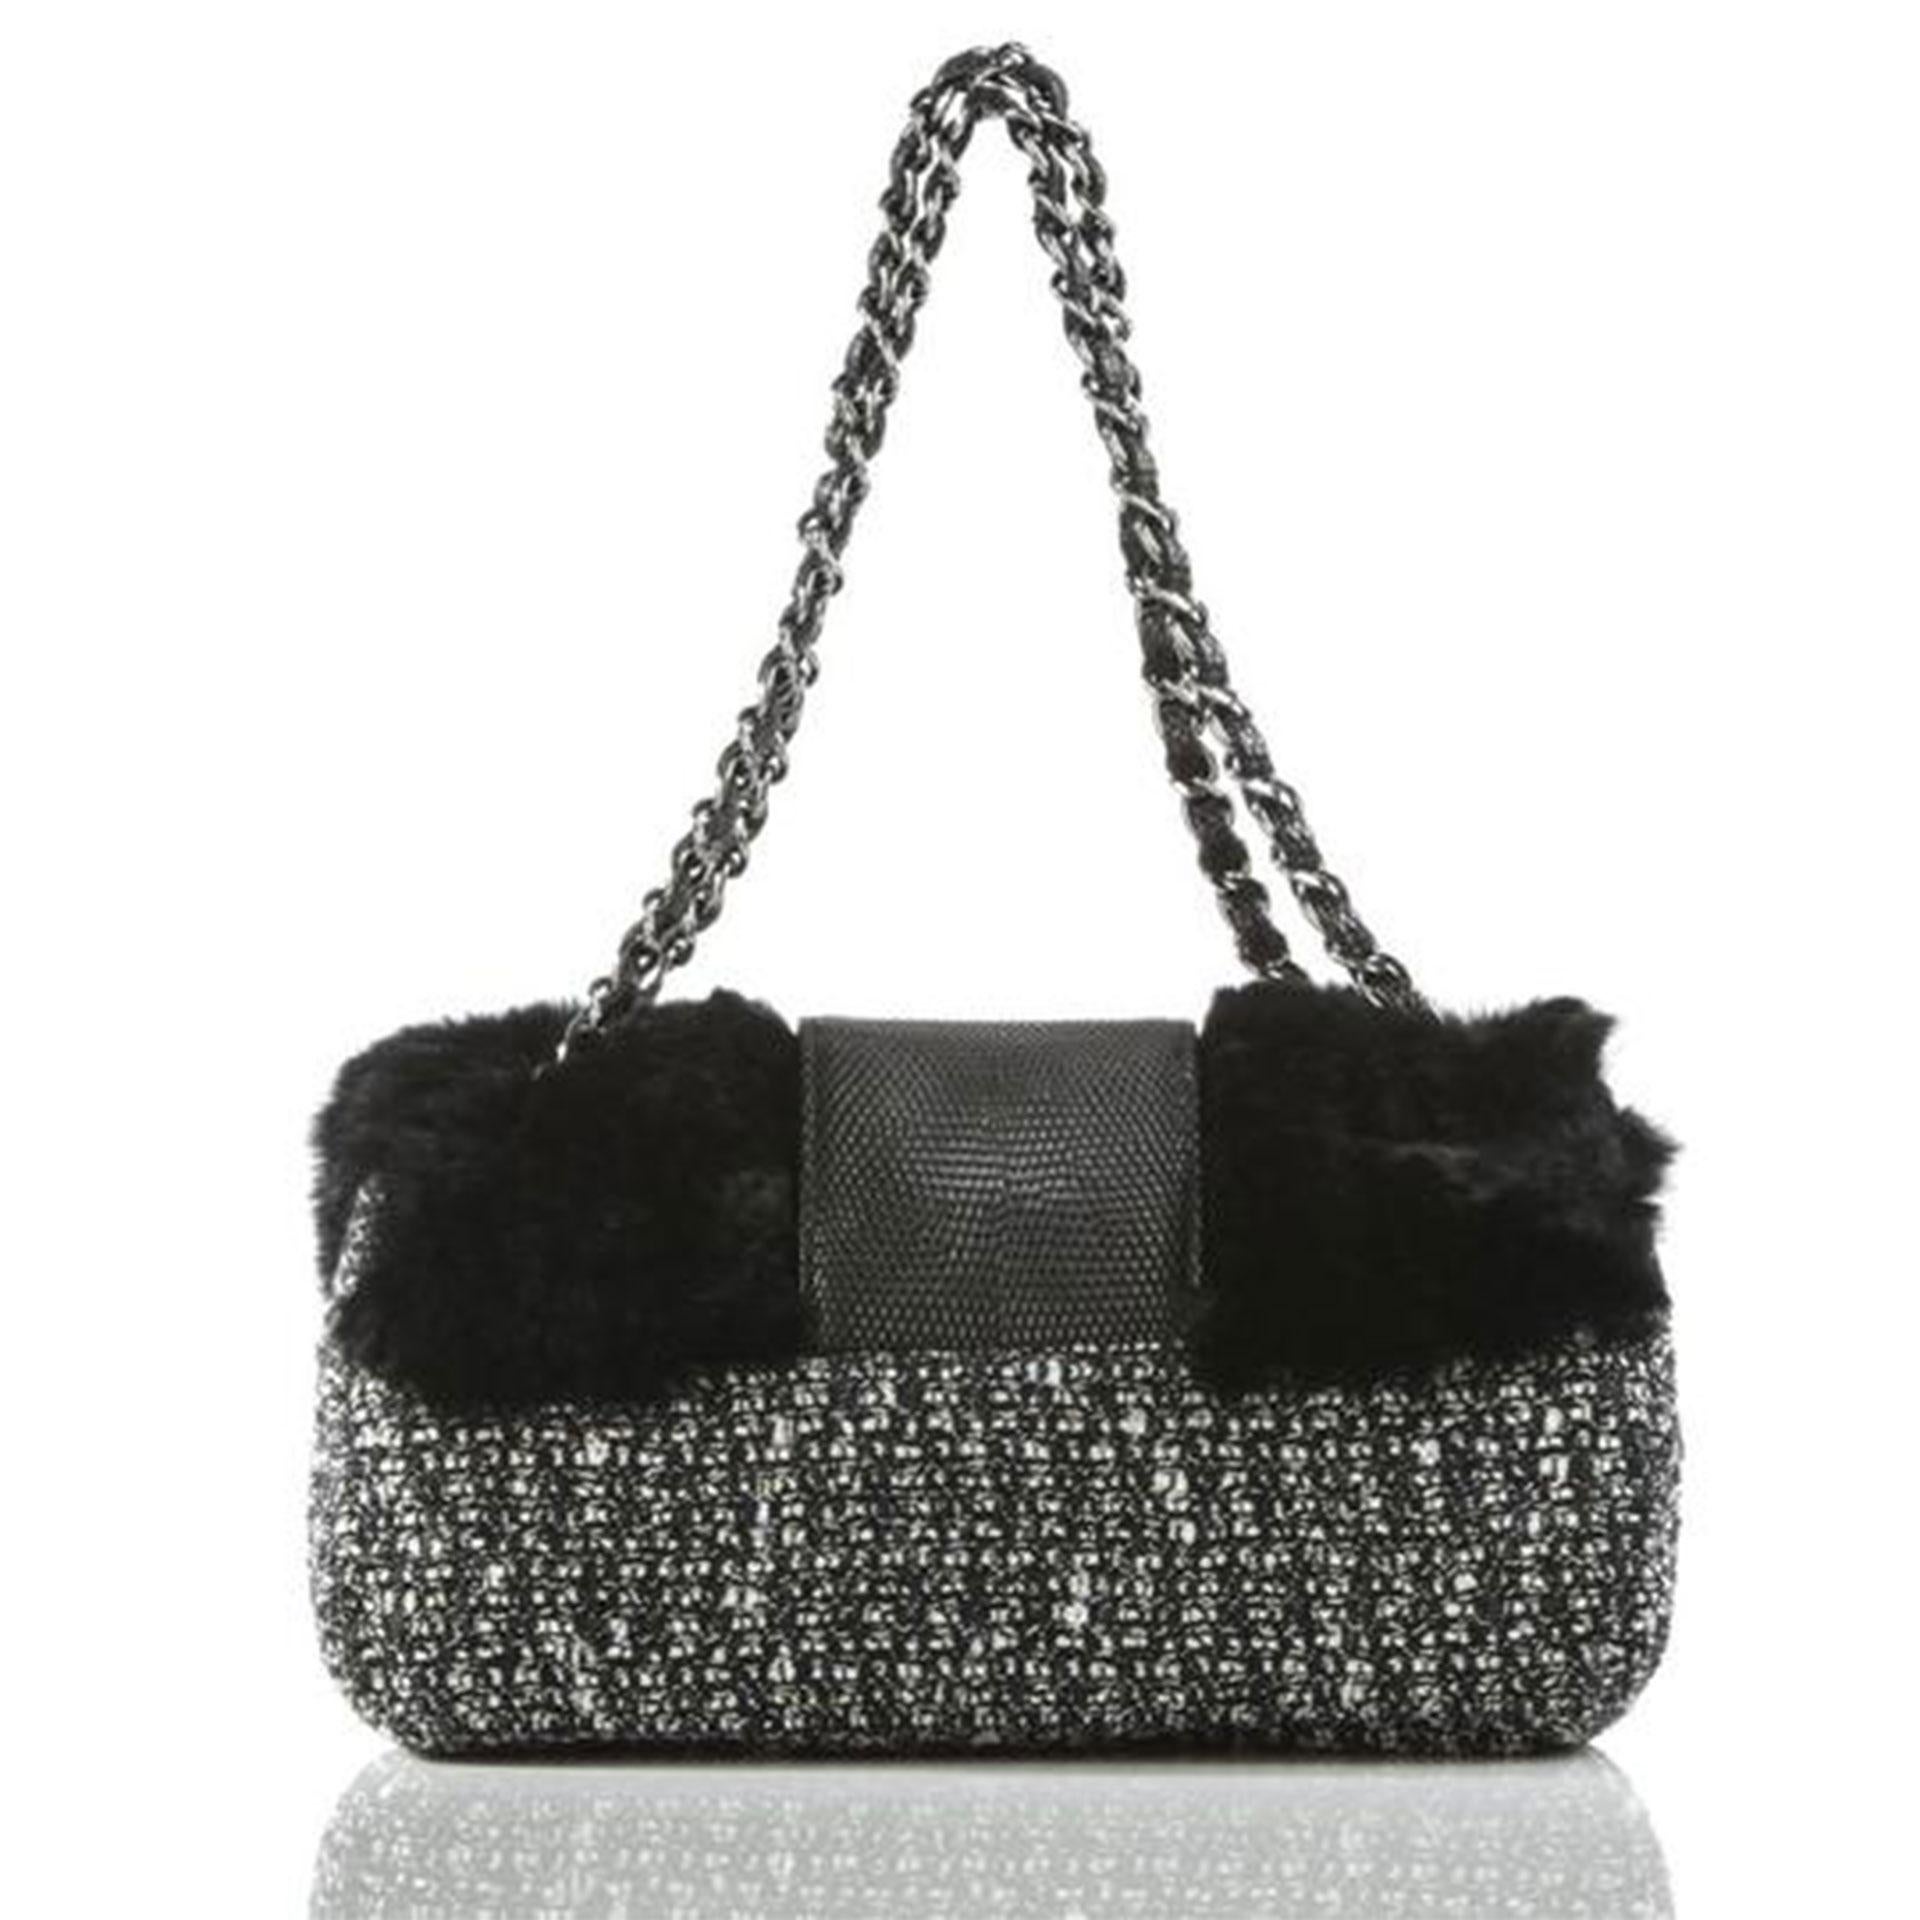 Chanel Classic Flap Limited Edition 2005 Black & White Grey Tweed Fur Lizard Bag In Good Condition For Sale In Miami, FL